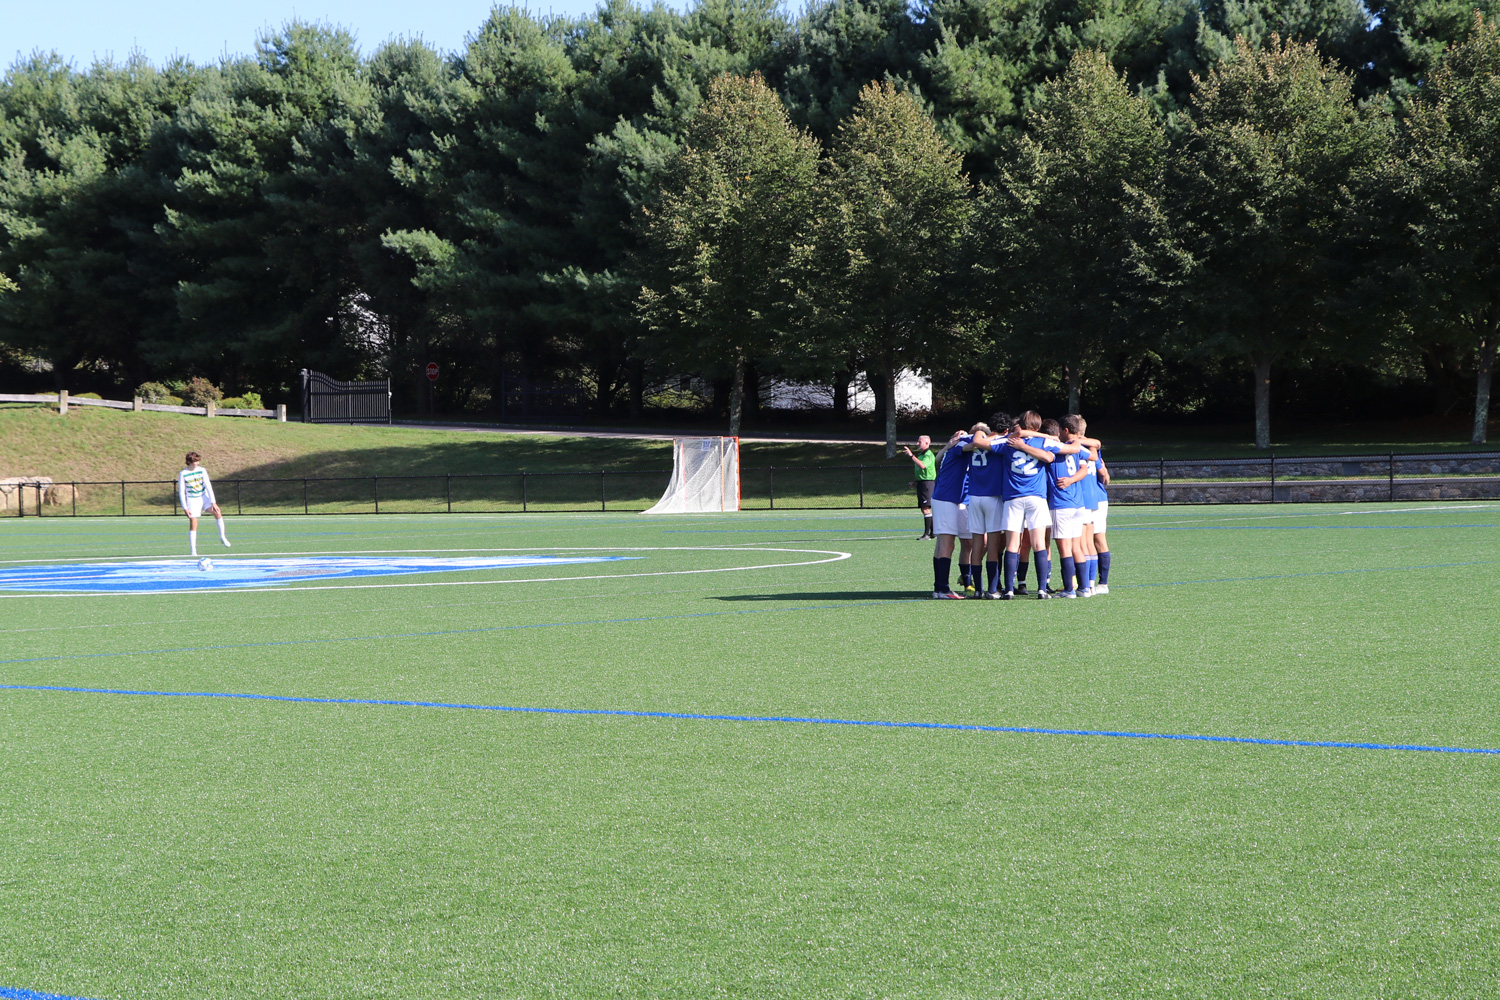 soccer team huddle on turf field before game